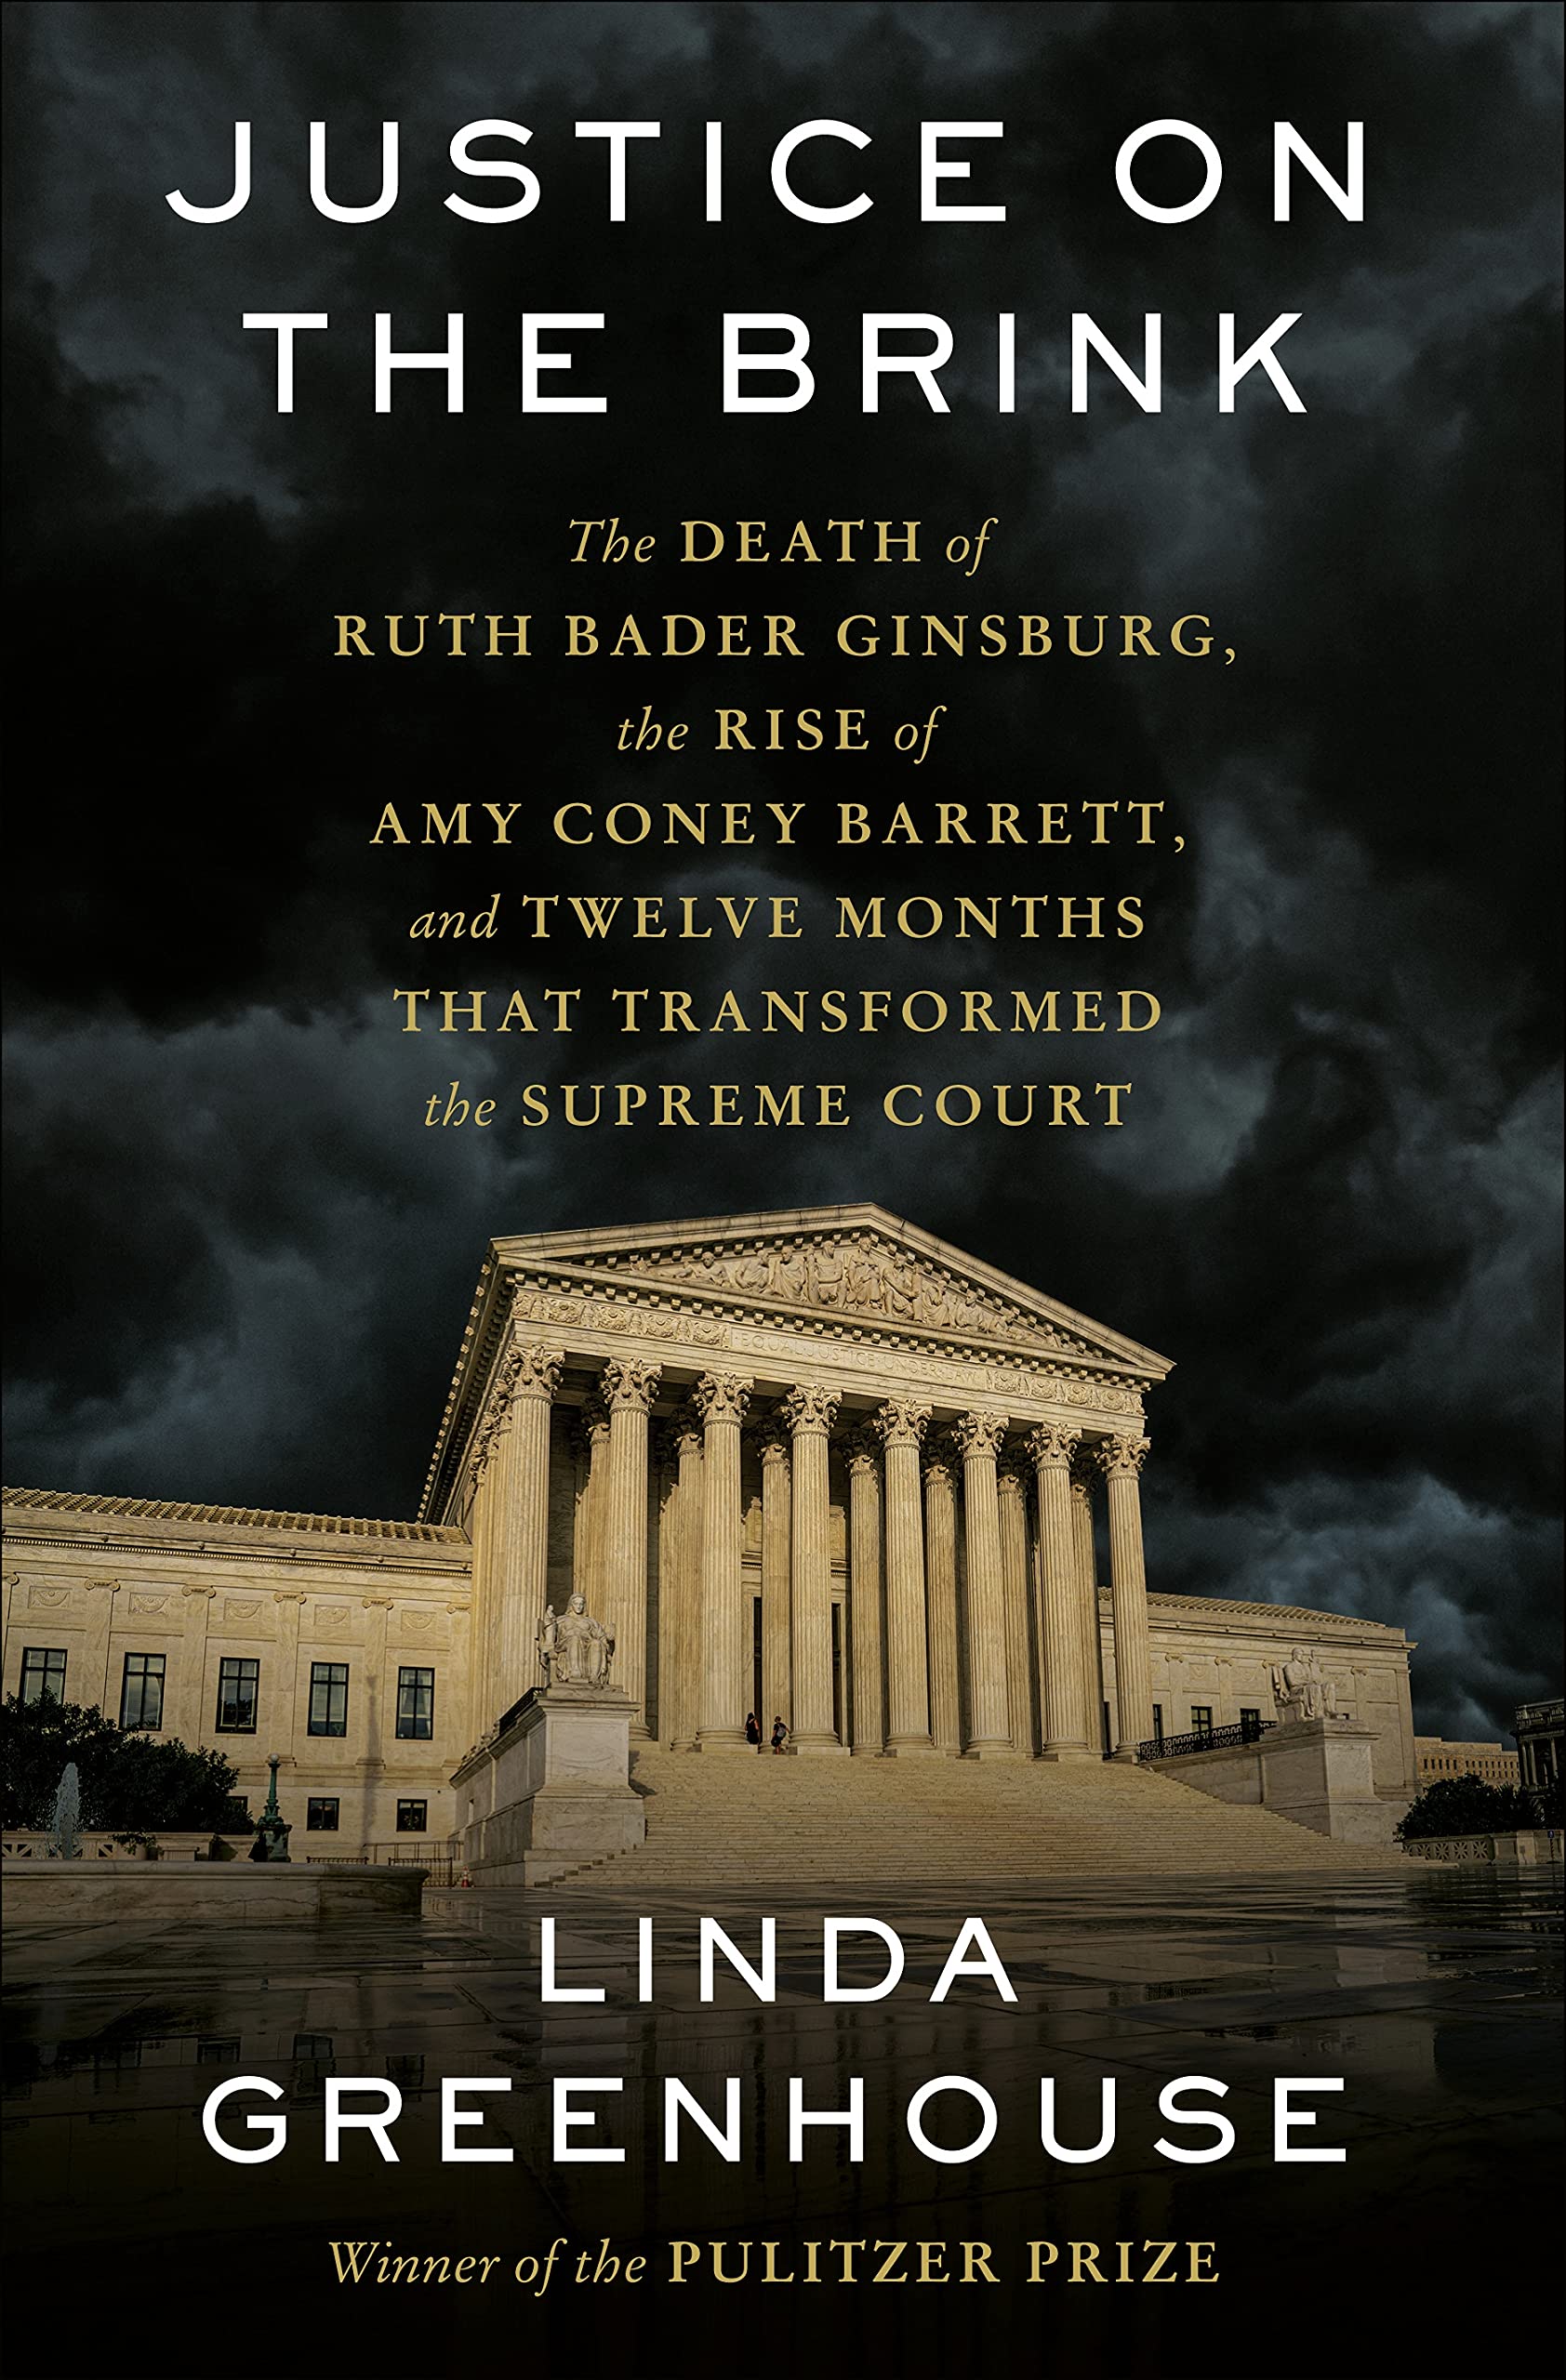 Image for "Justice on the Brink: The Death of Ruth Bader Ginsburg, the Rise of Amy Coney Barrett, and Twelve Months That Transformed the Supreme Court"